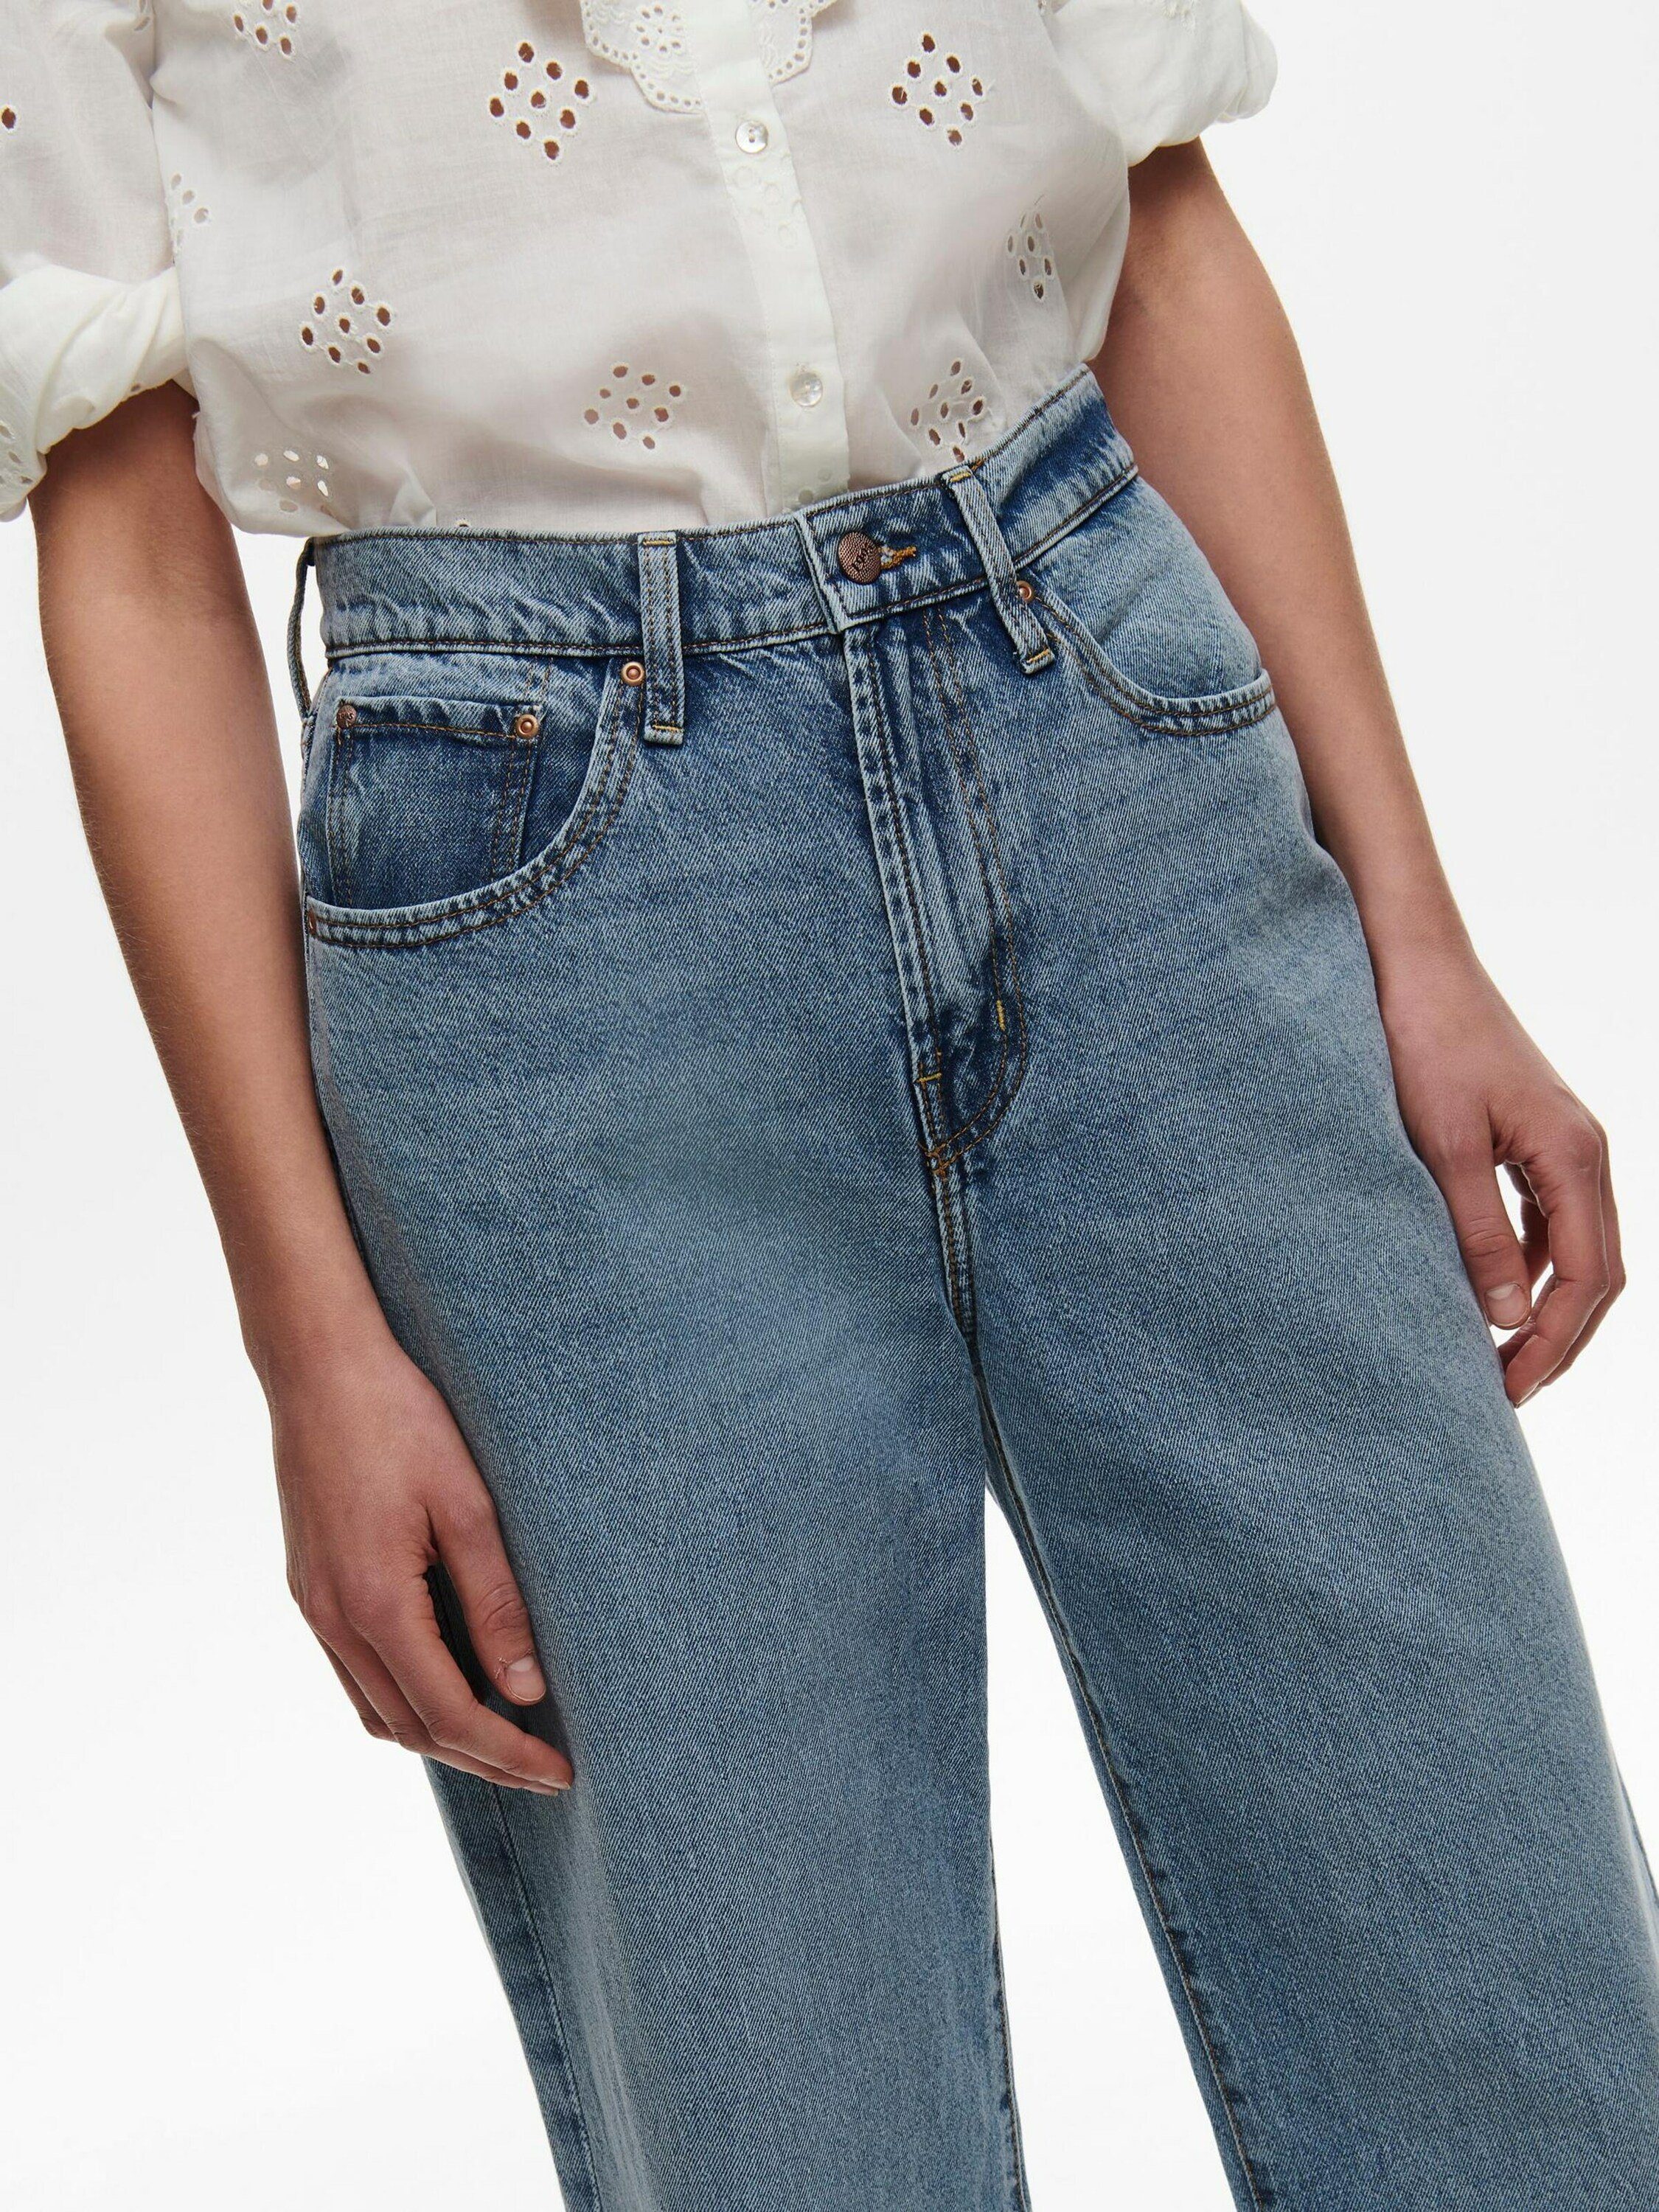 Weiteres Hope ONLY (1-tlg) Weite Jeans Detail, Details Plain/ohne